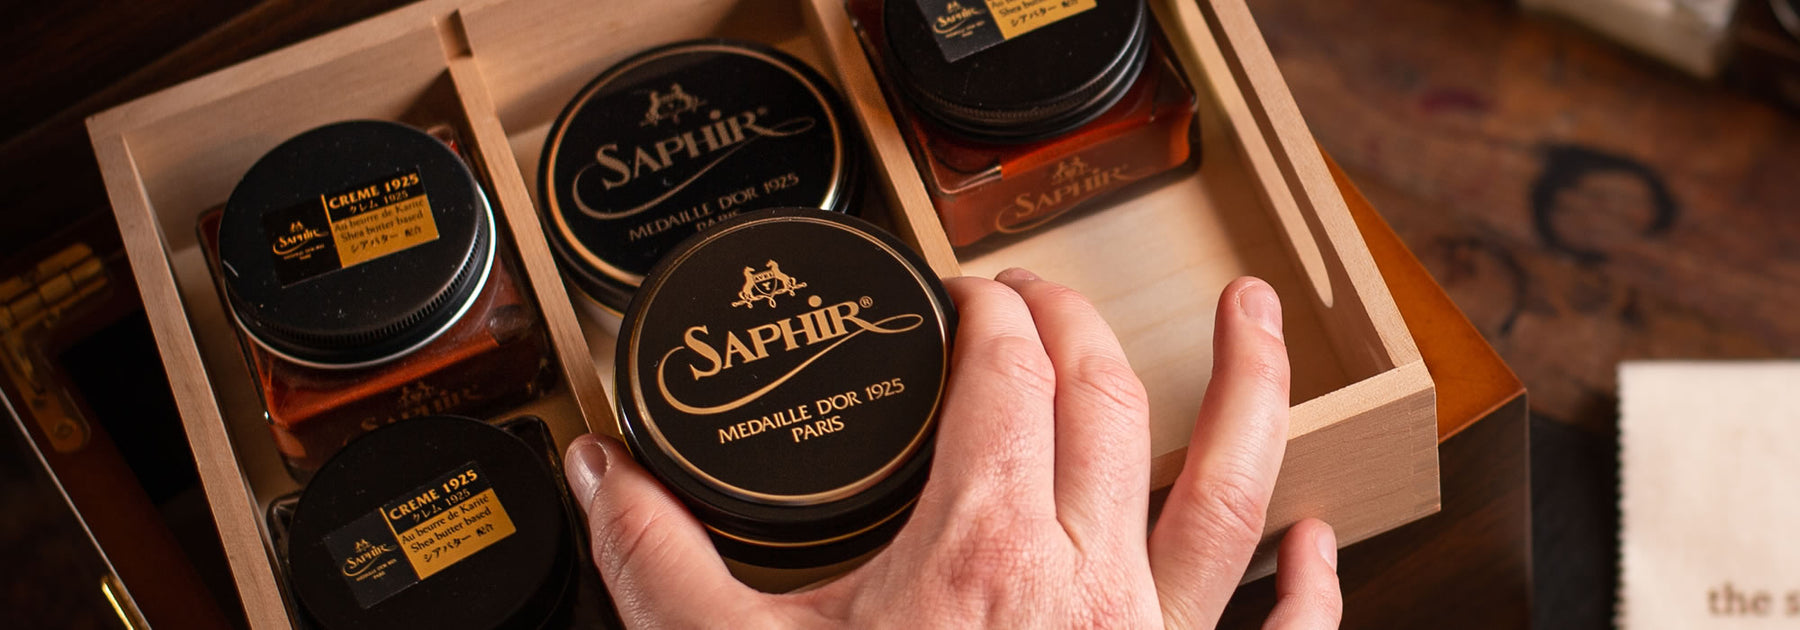 Top 5 Shoe Care Products from Saphir Médaille d'Or